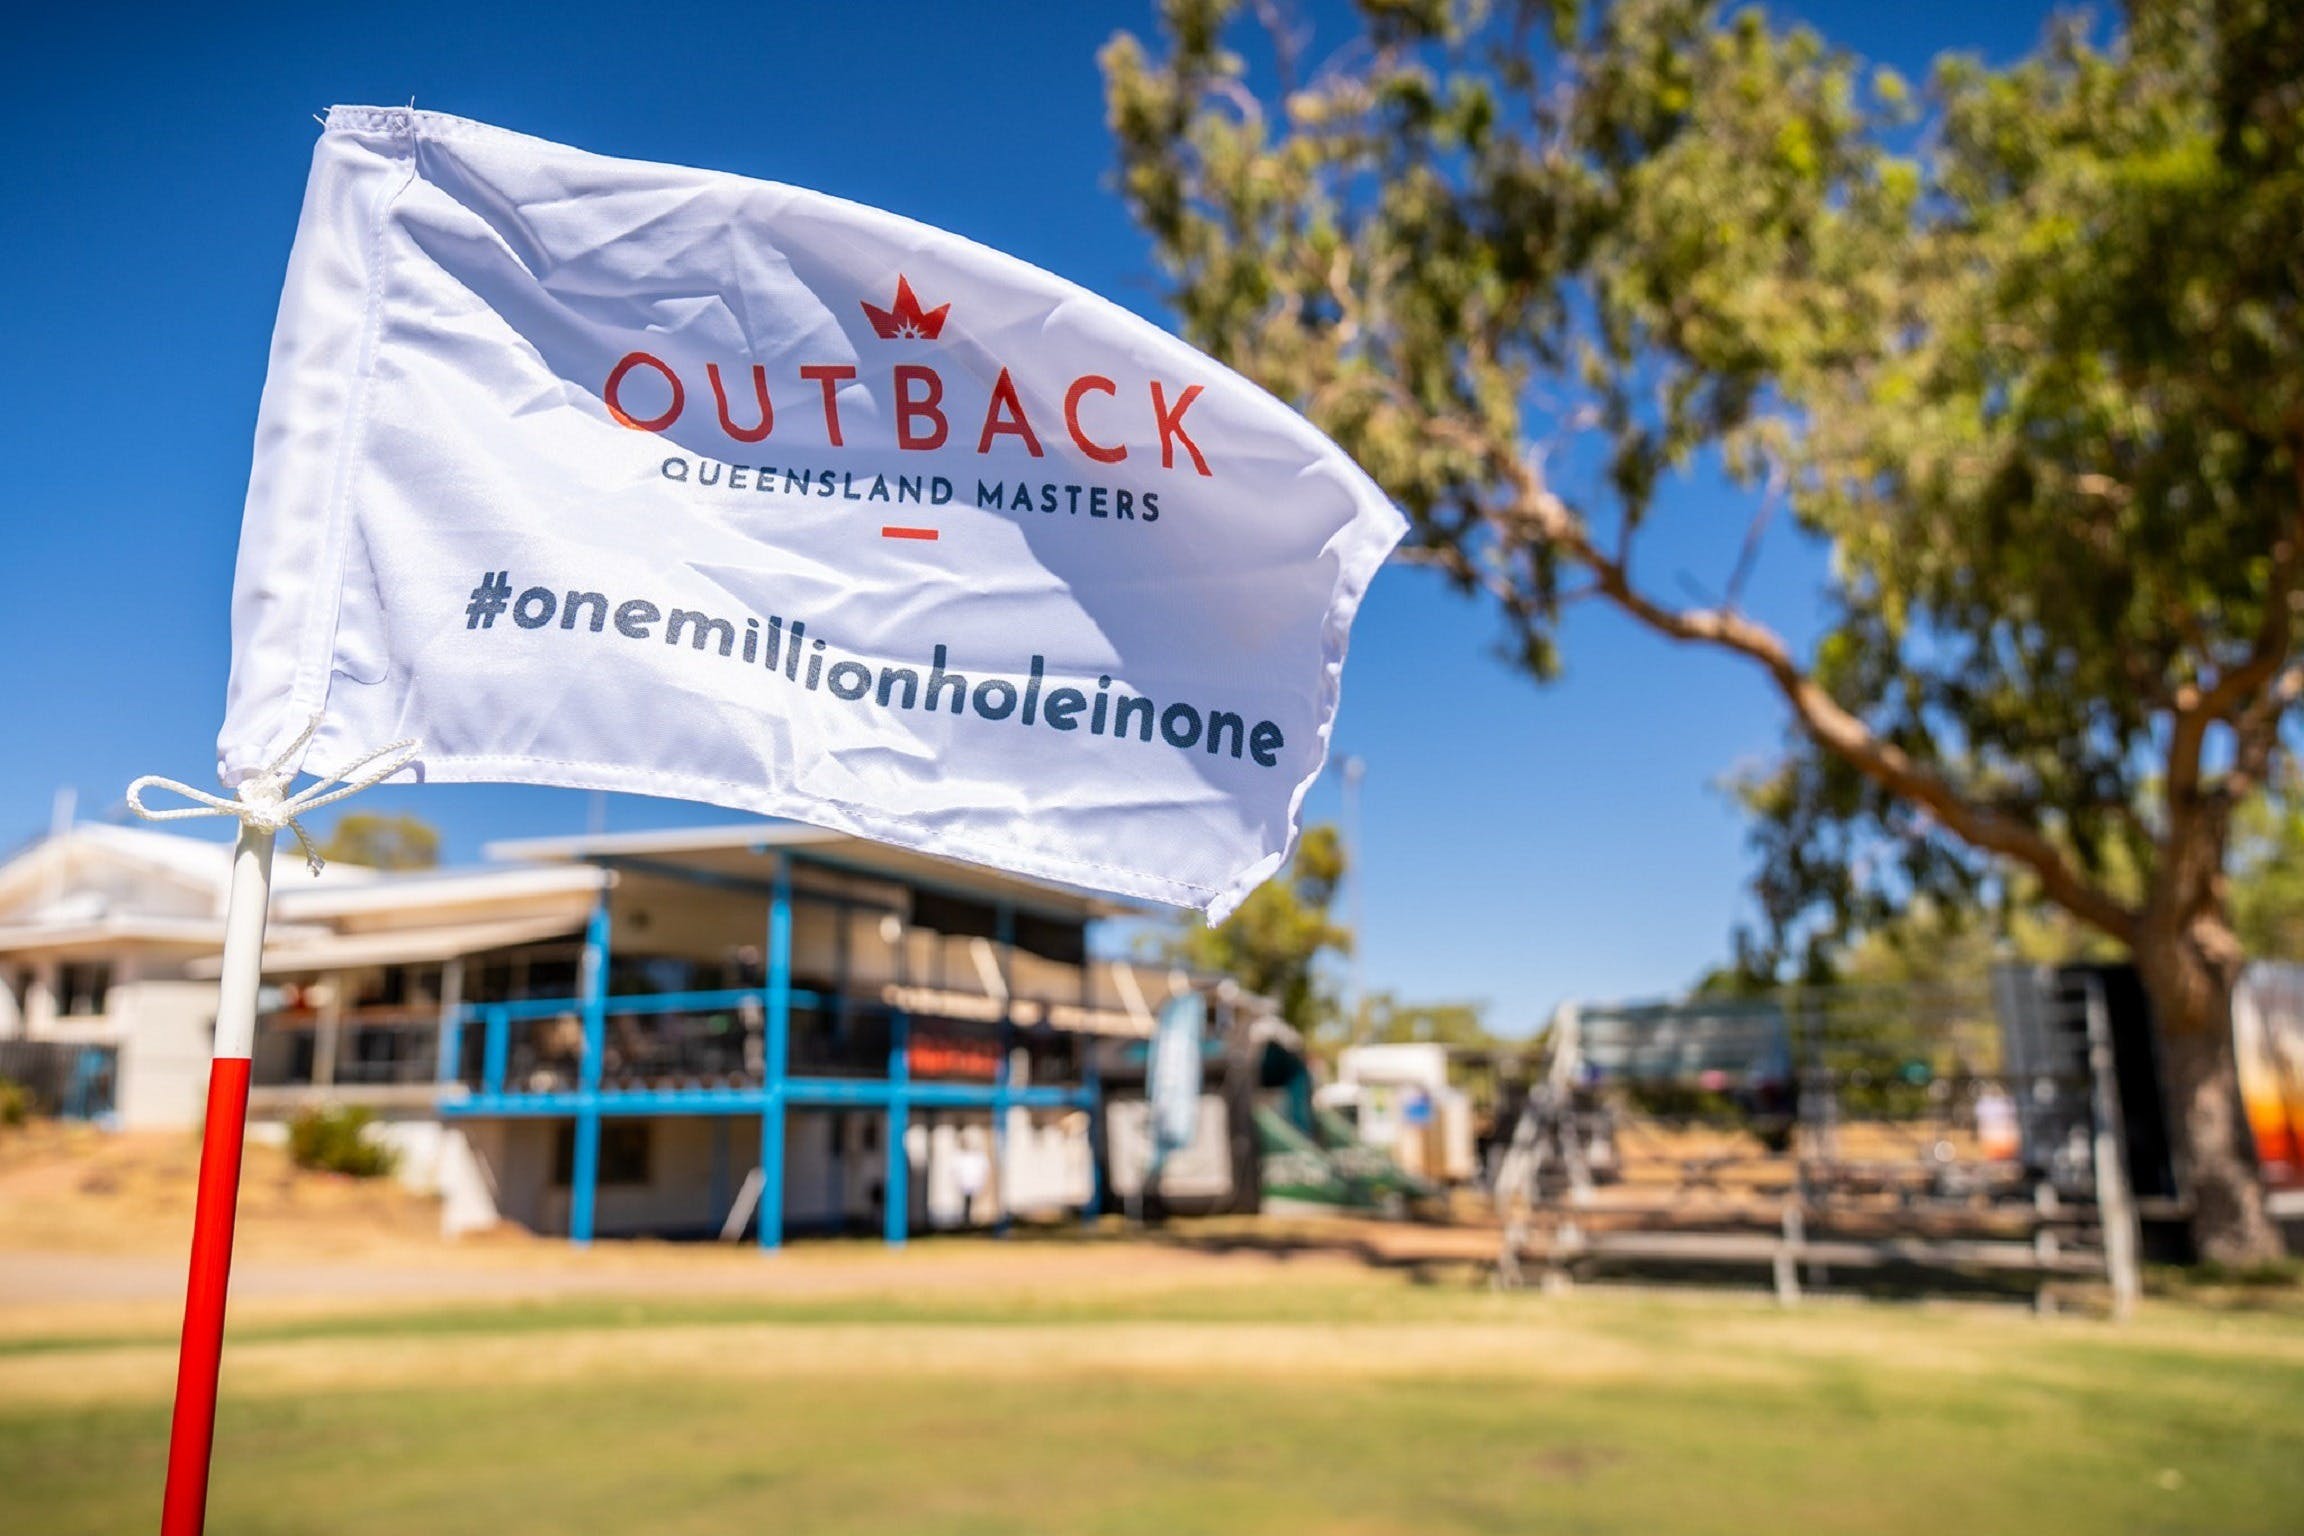 Outback Queensland Masters Charleville Leg 2021 - Pubs and Clubs